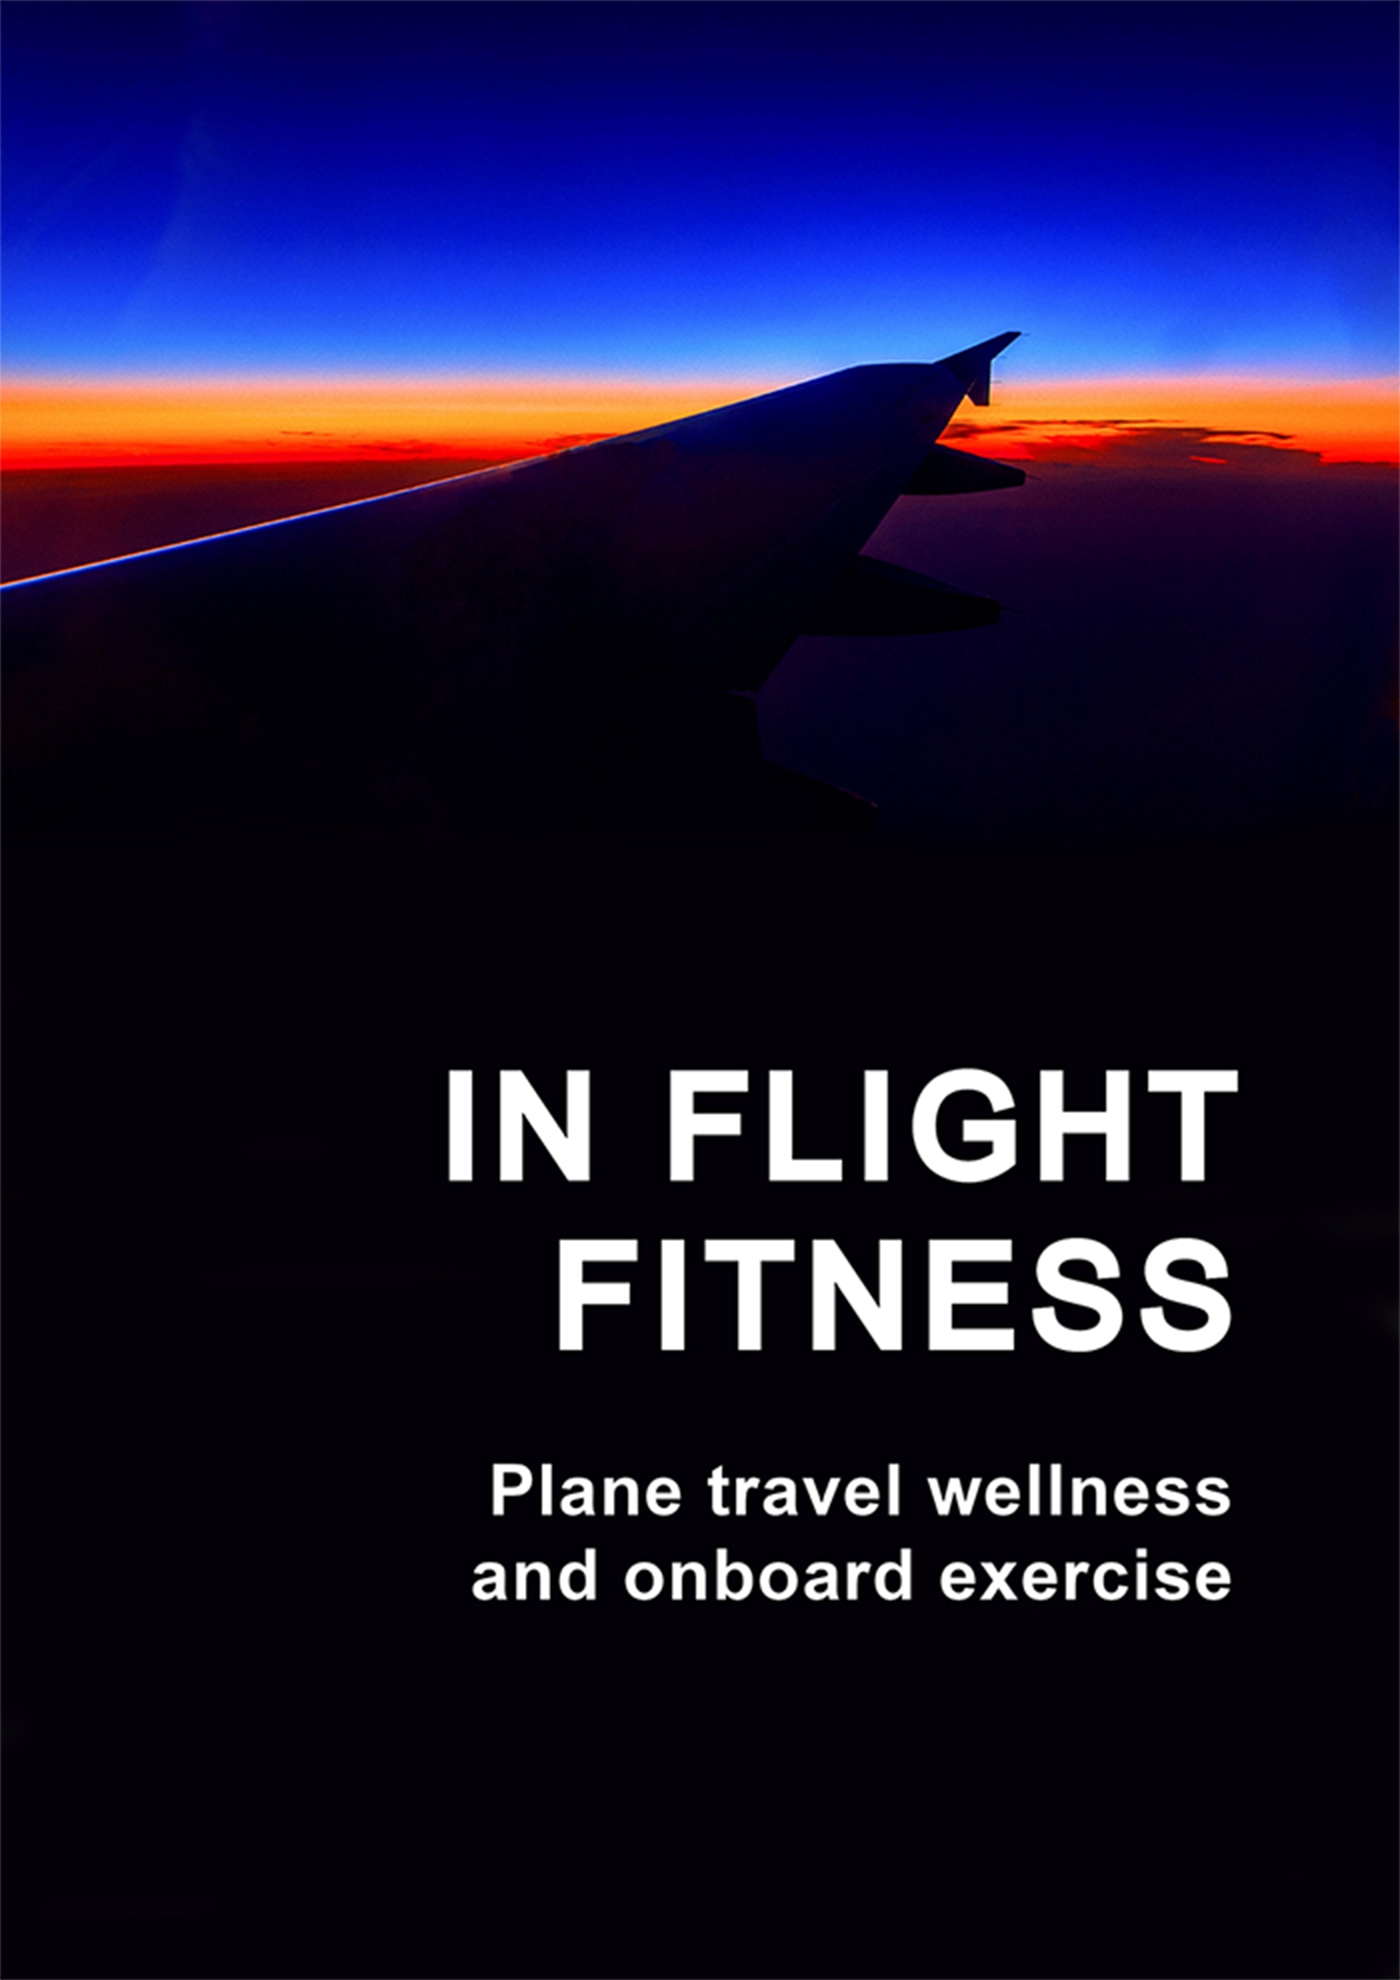 In_Flight_Fitness_Plane_travel_wellness_and_onboard_exercise_Marina_Aagaard_blog